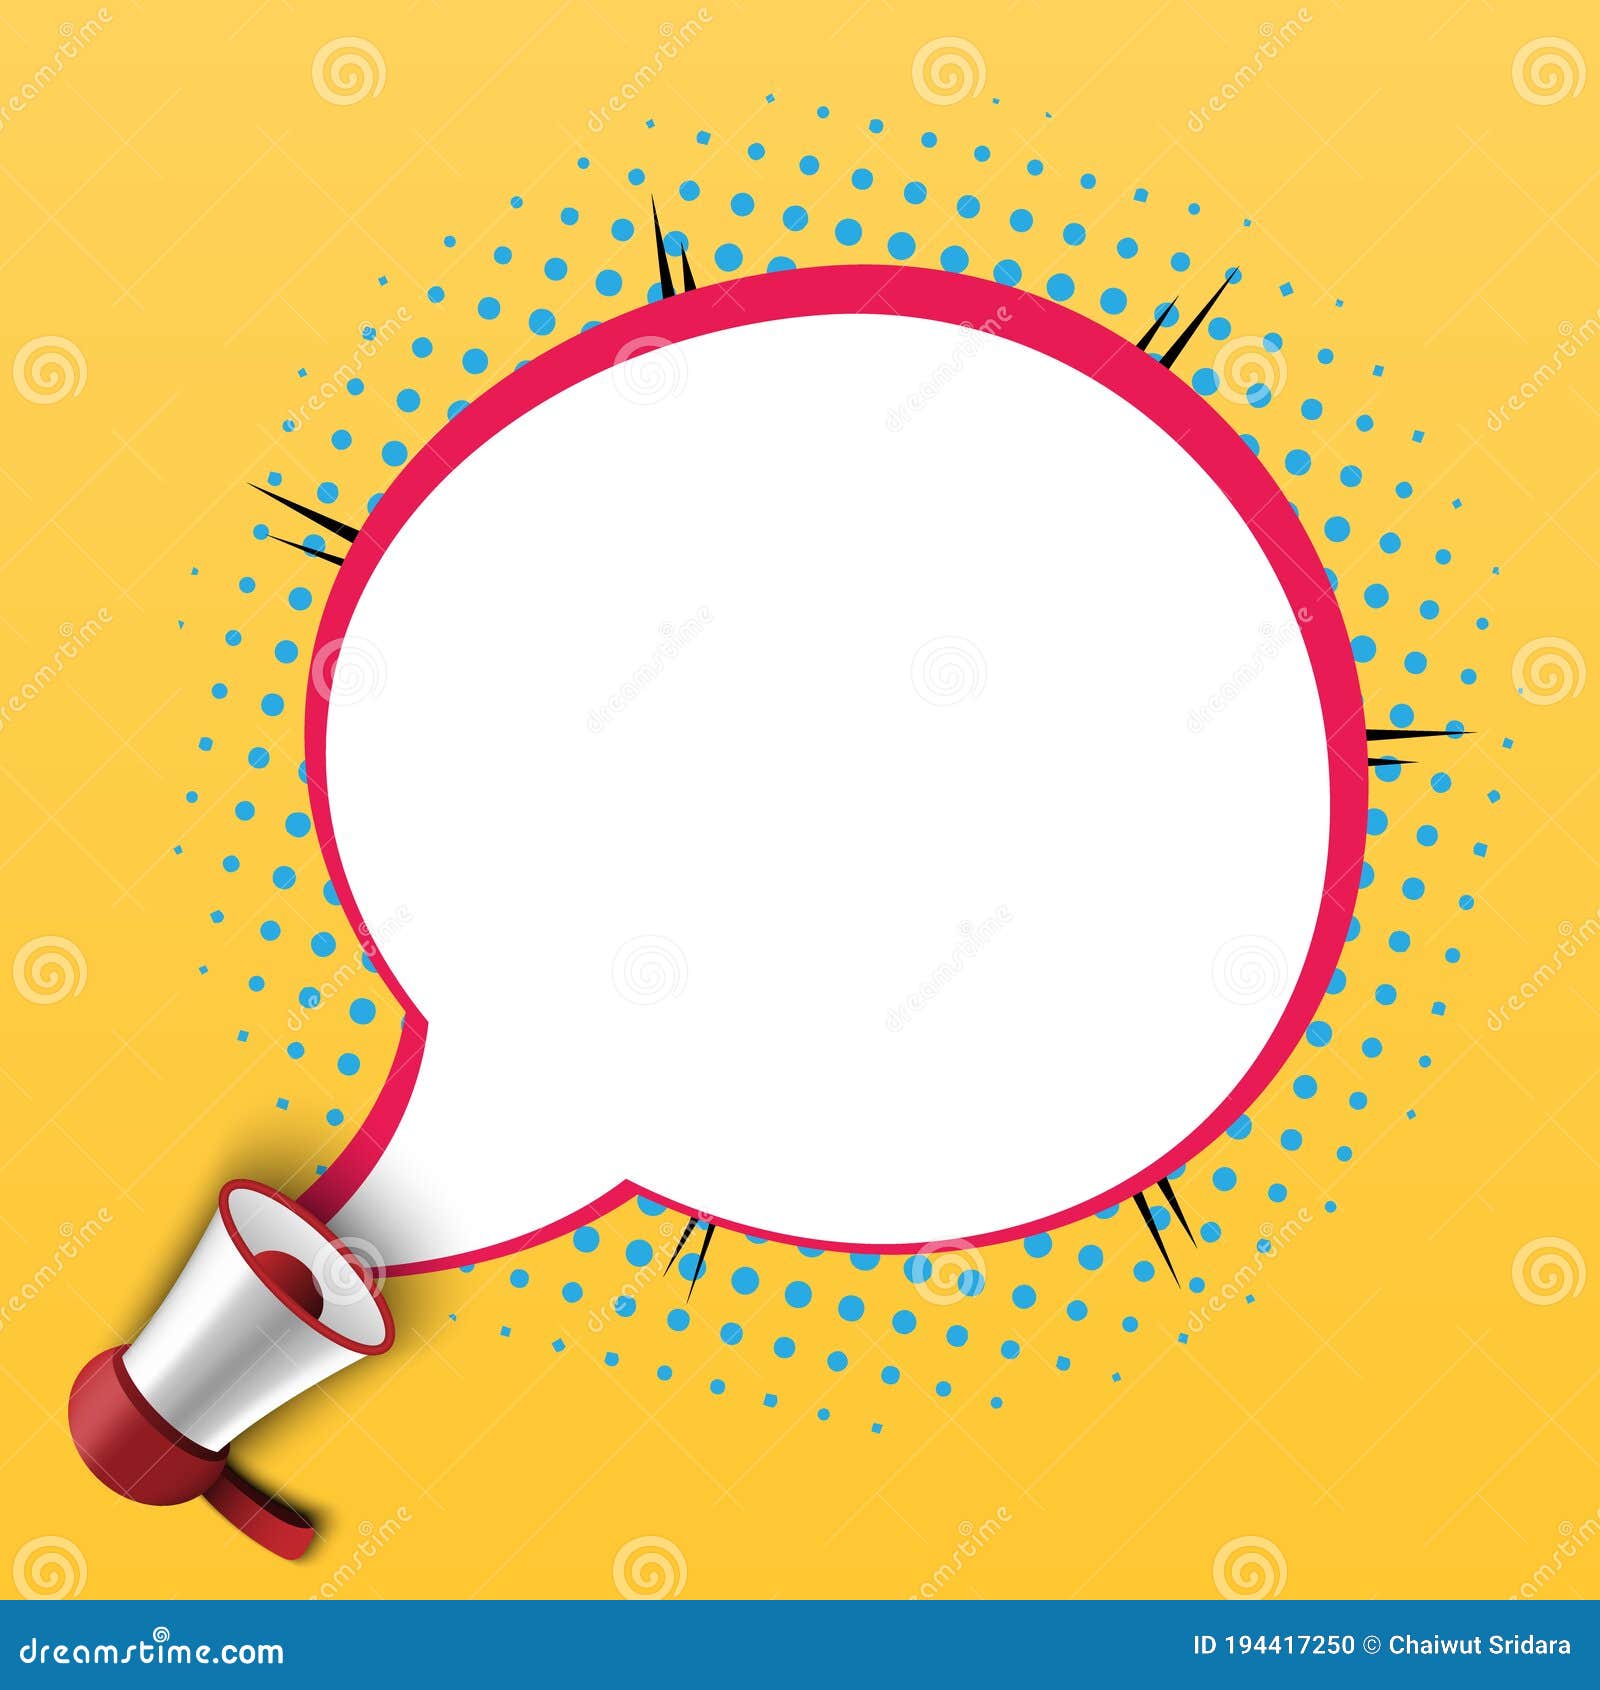 megaphone with bubble speech template for advertisment, 